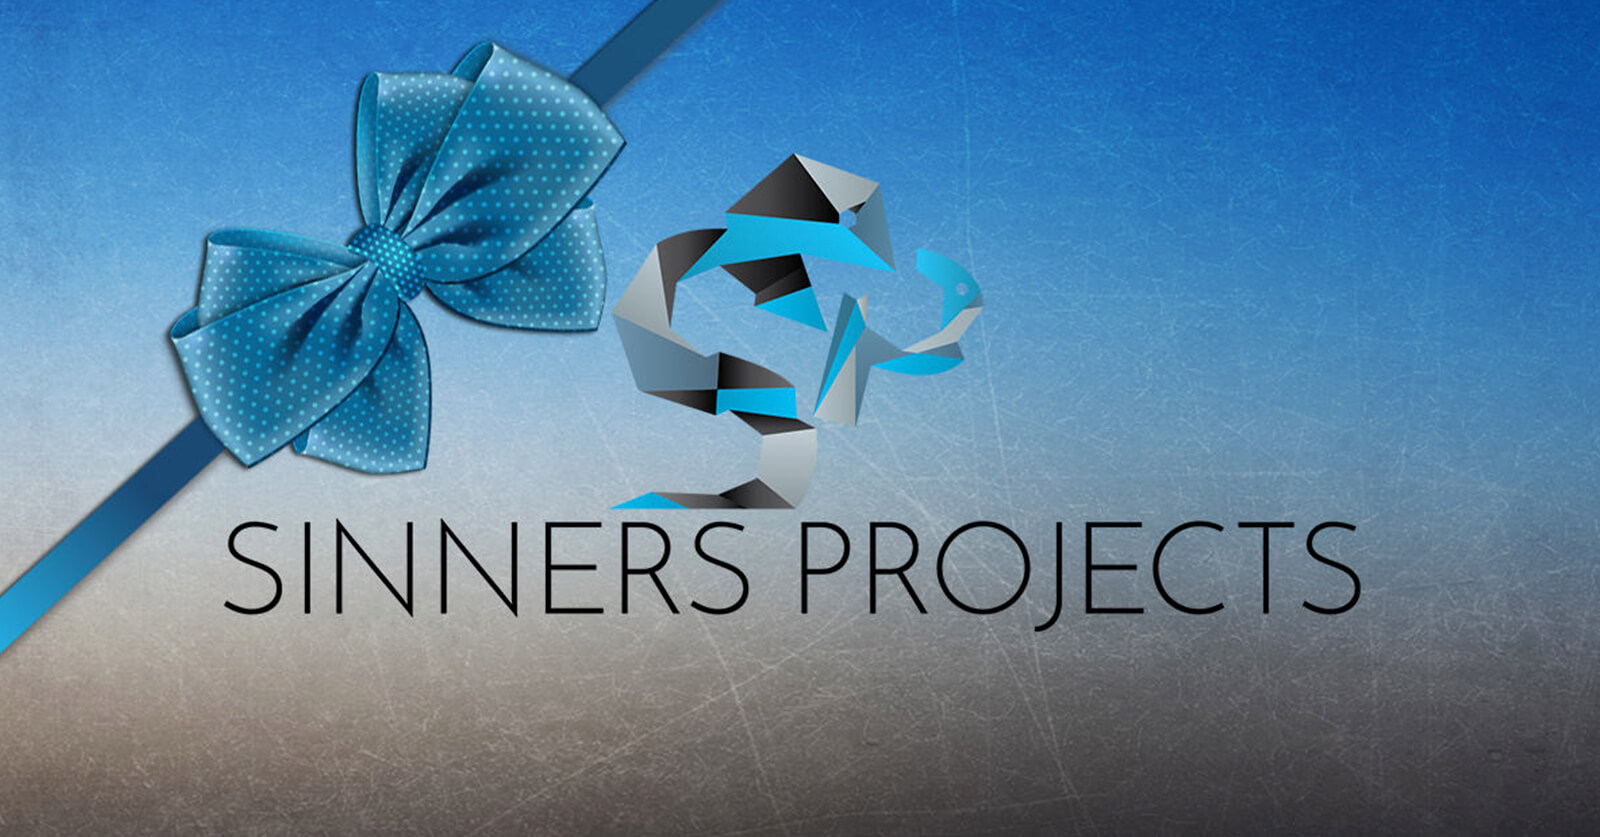 Sinners Projects Despre ultimul redesign